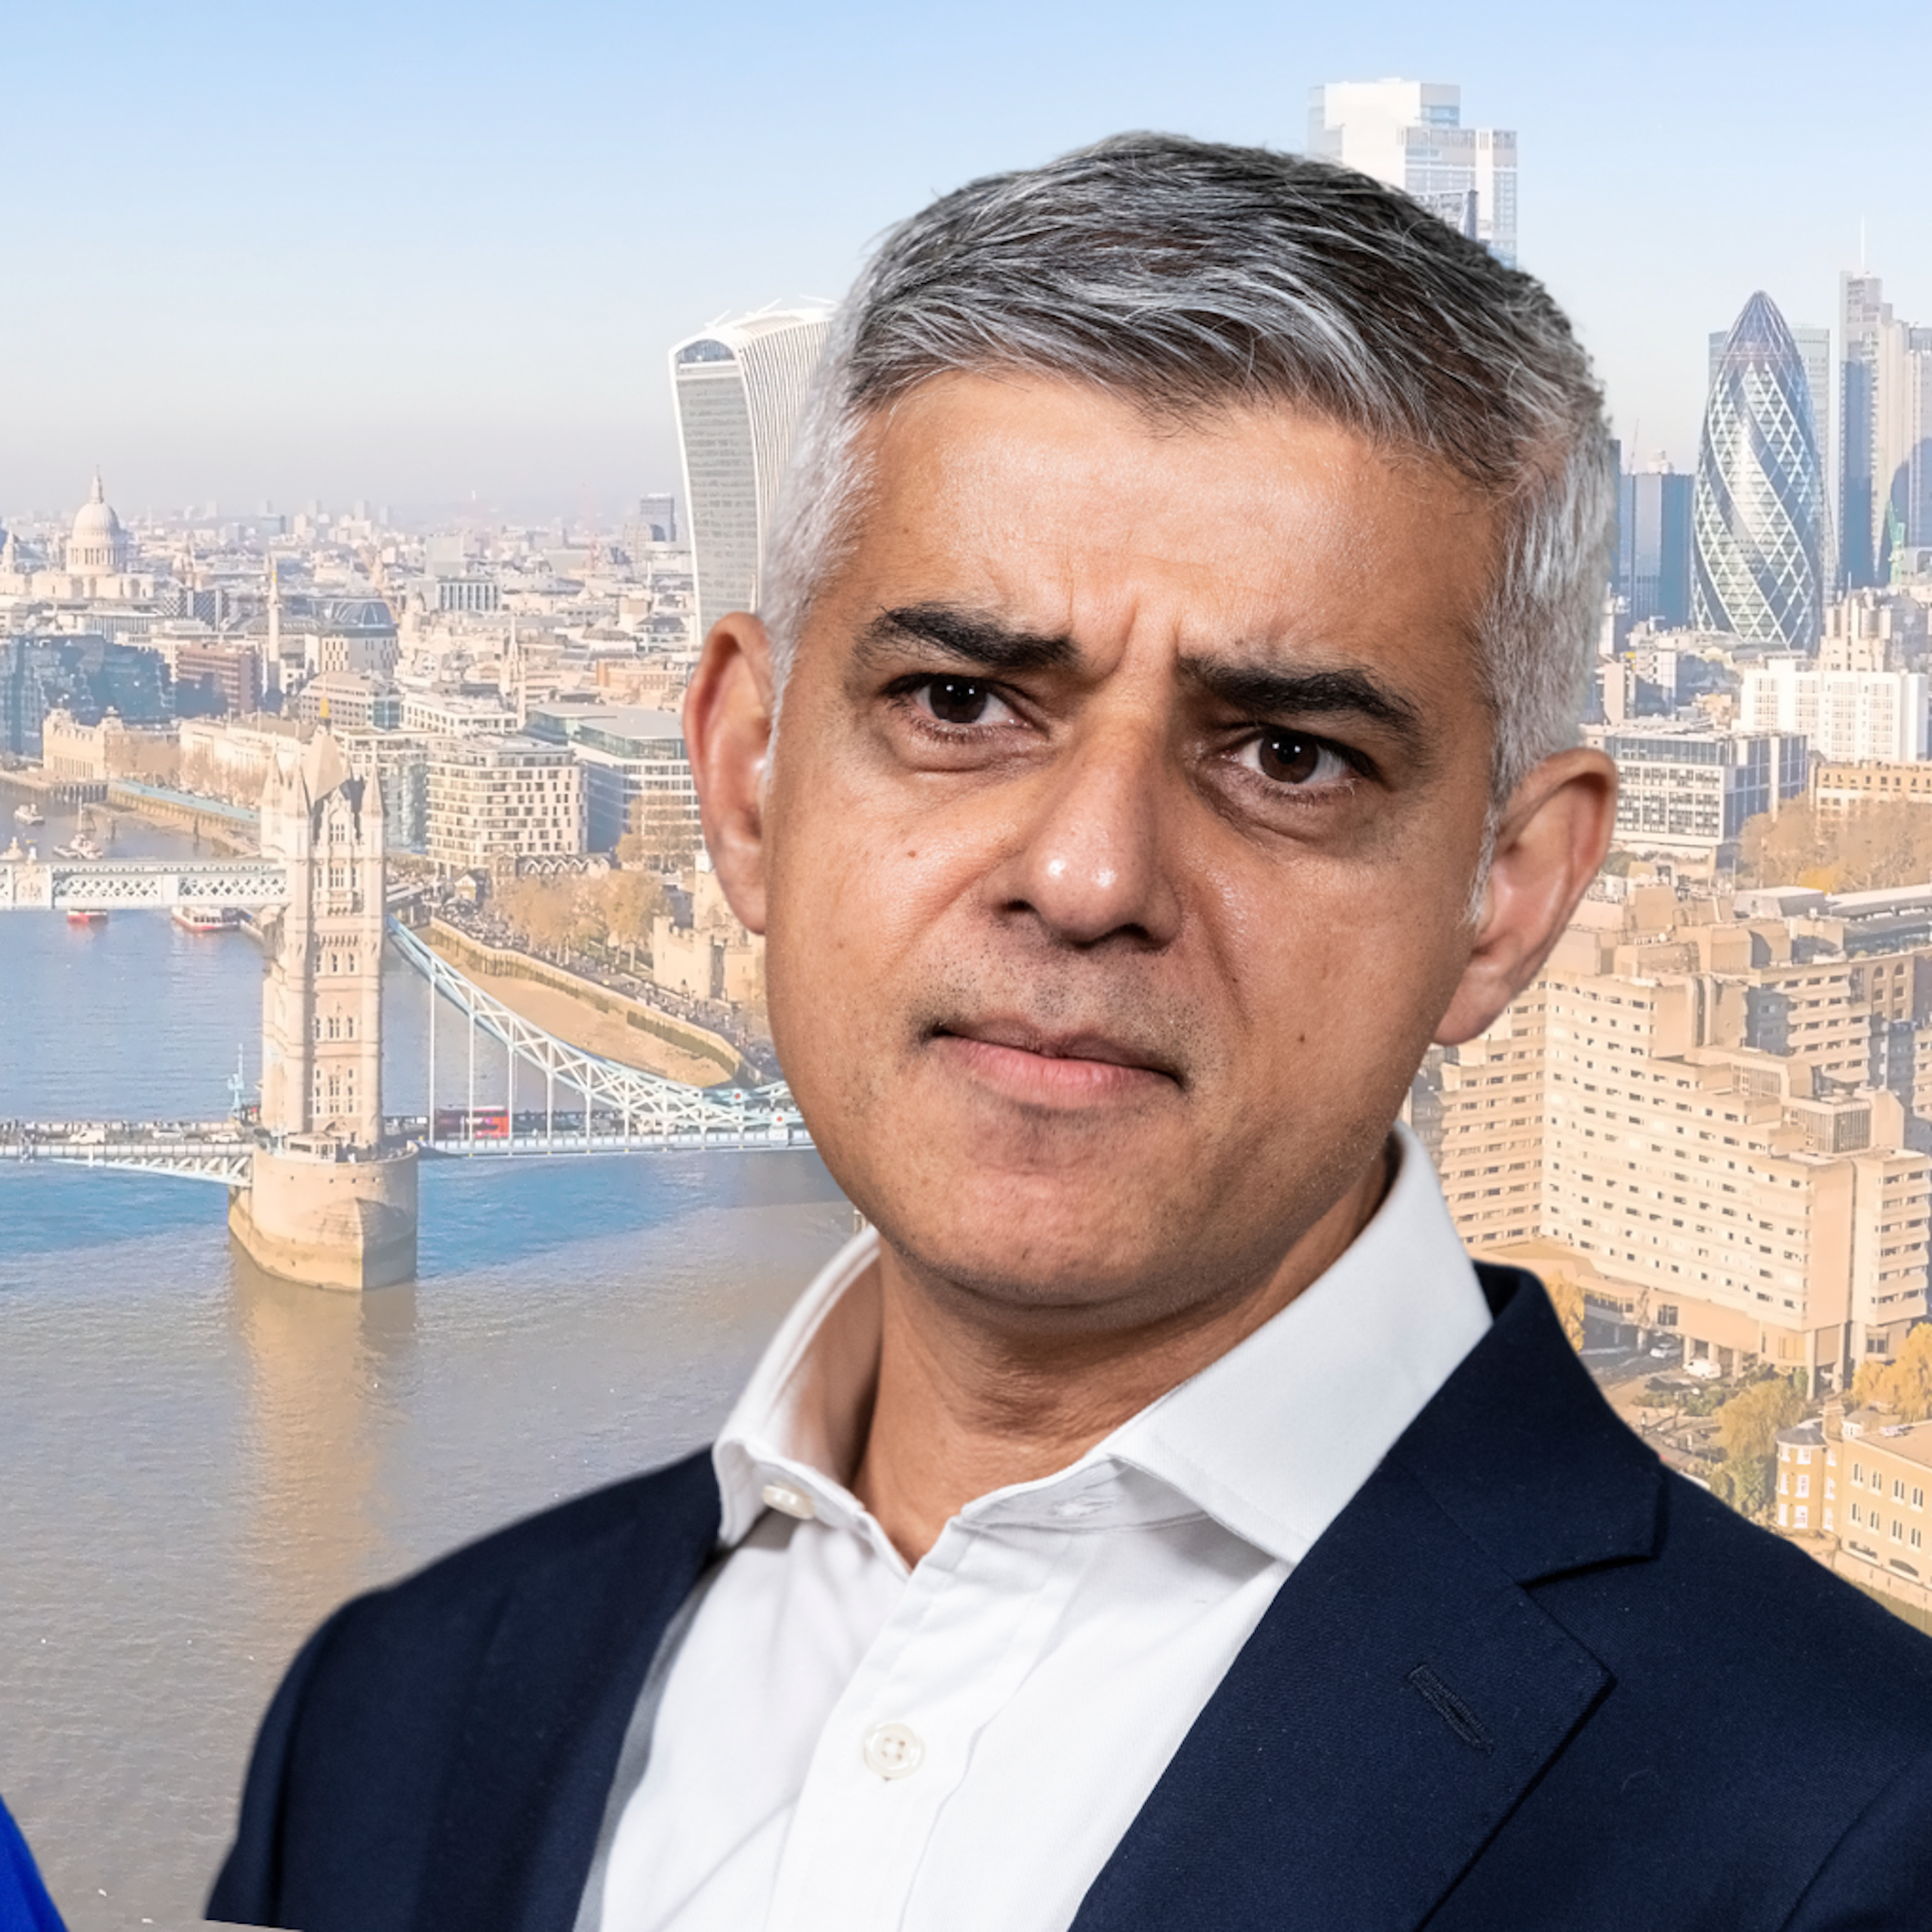 Is the London mayoral race tightening? New poll shows Sadiq Khan leads Susan Hall by 13 points